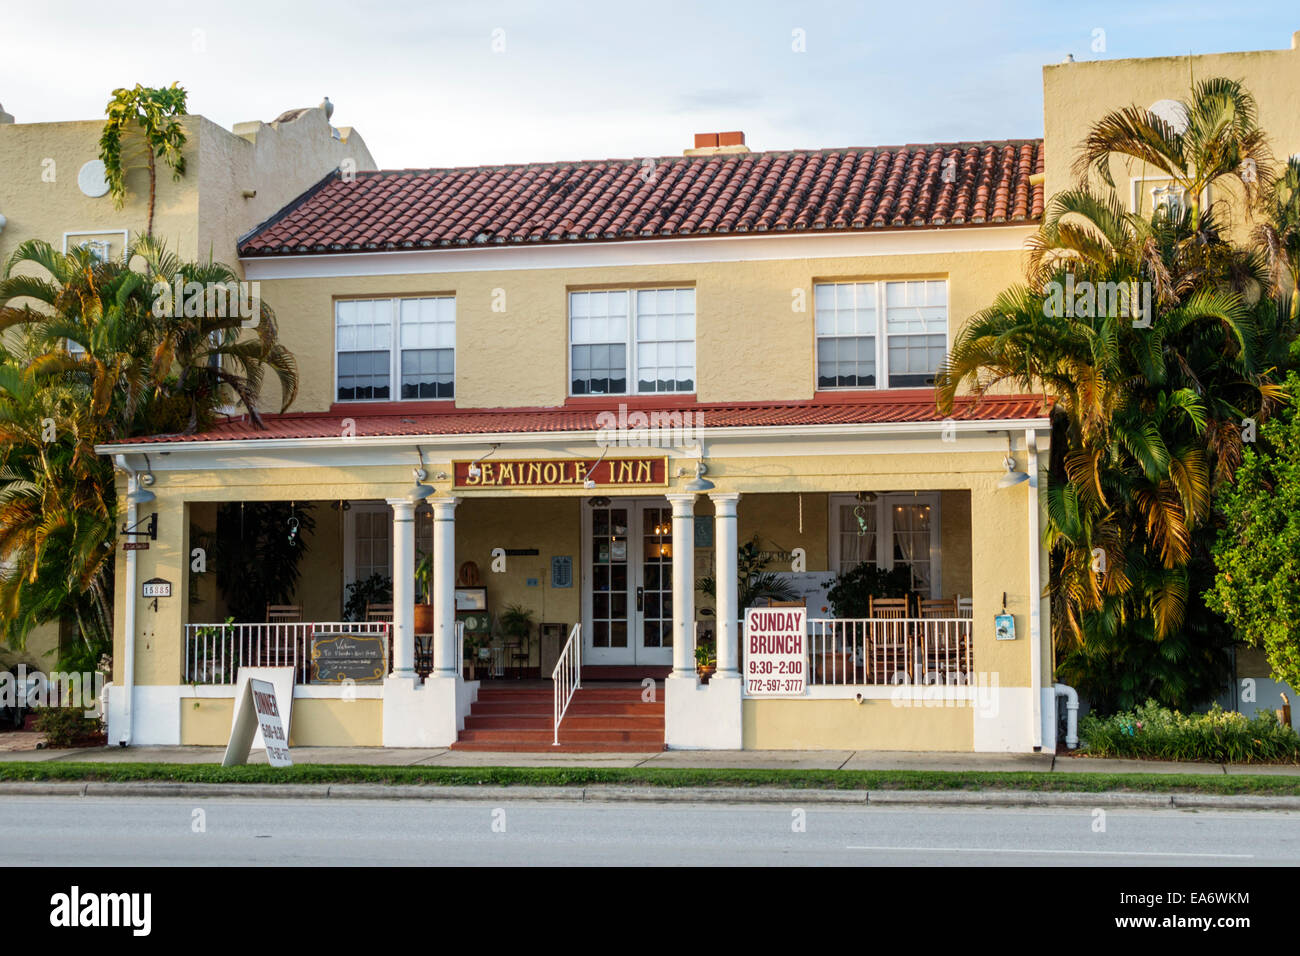 Indiantown Florida,Seminole Country Inn,Mission Revival,hotel,front,entrance,FL140803083 Stock Photo